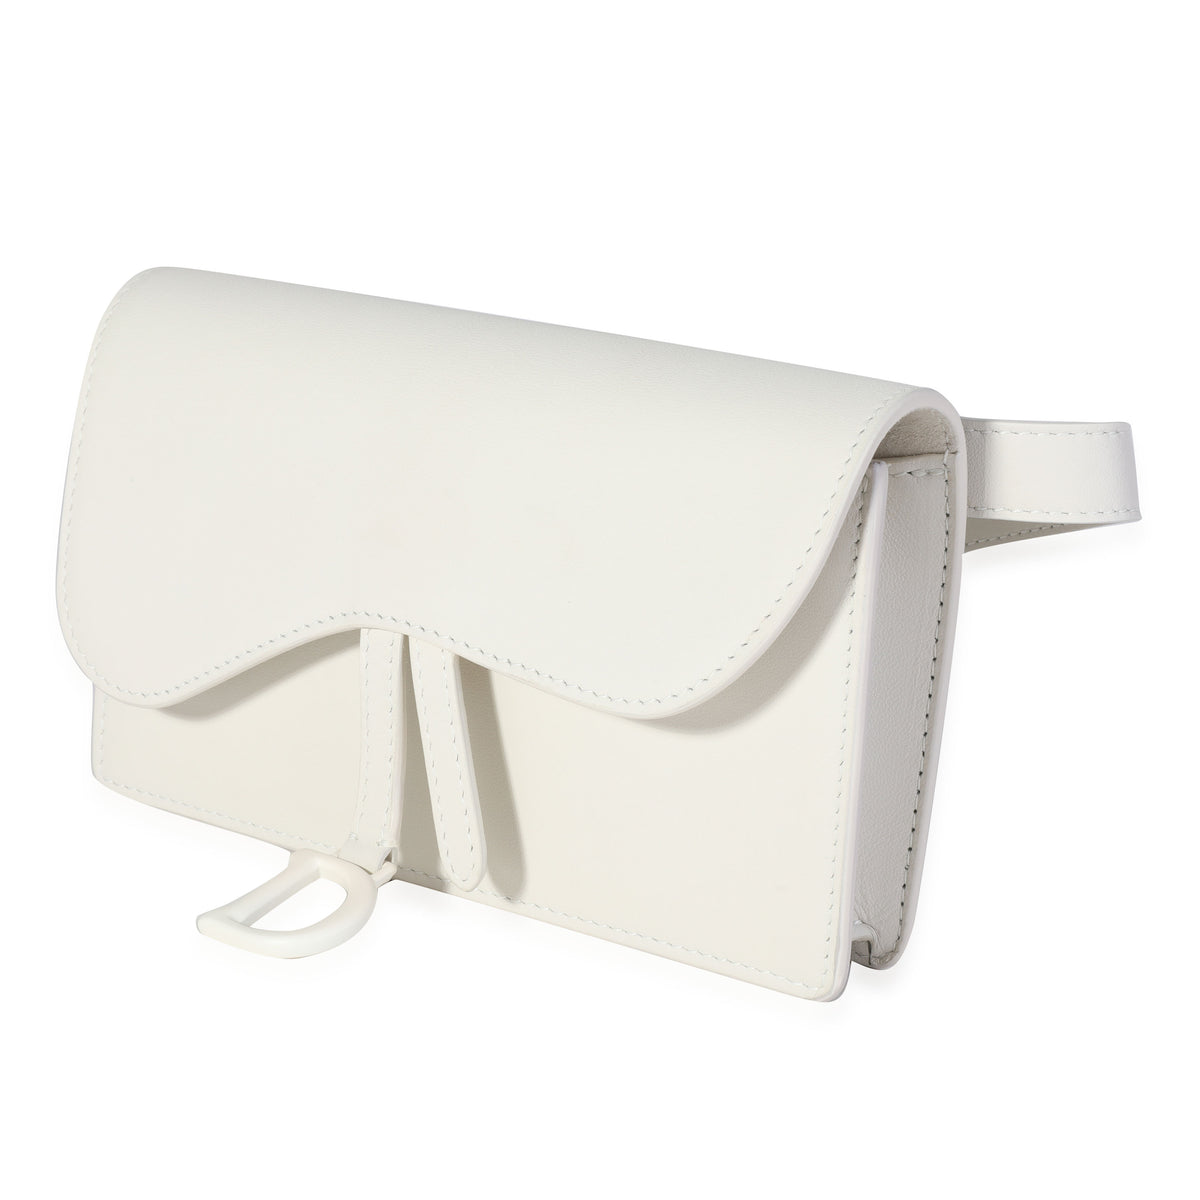 Designer Saddle Bags and Accessories for Women  DIOR GB